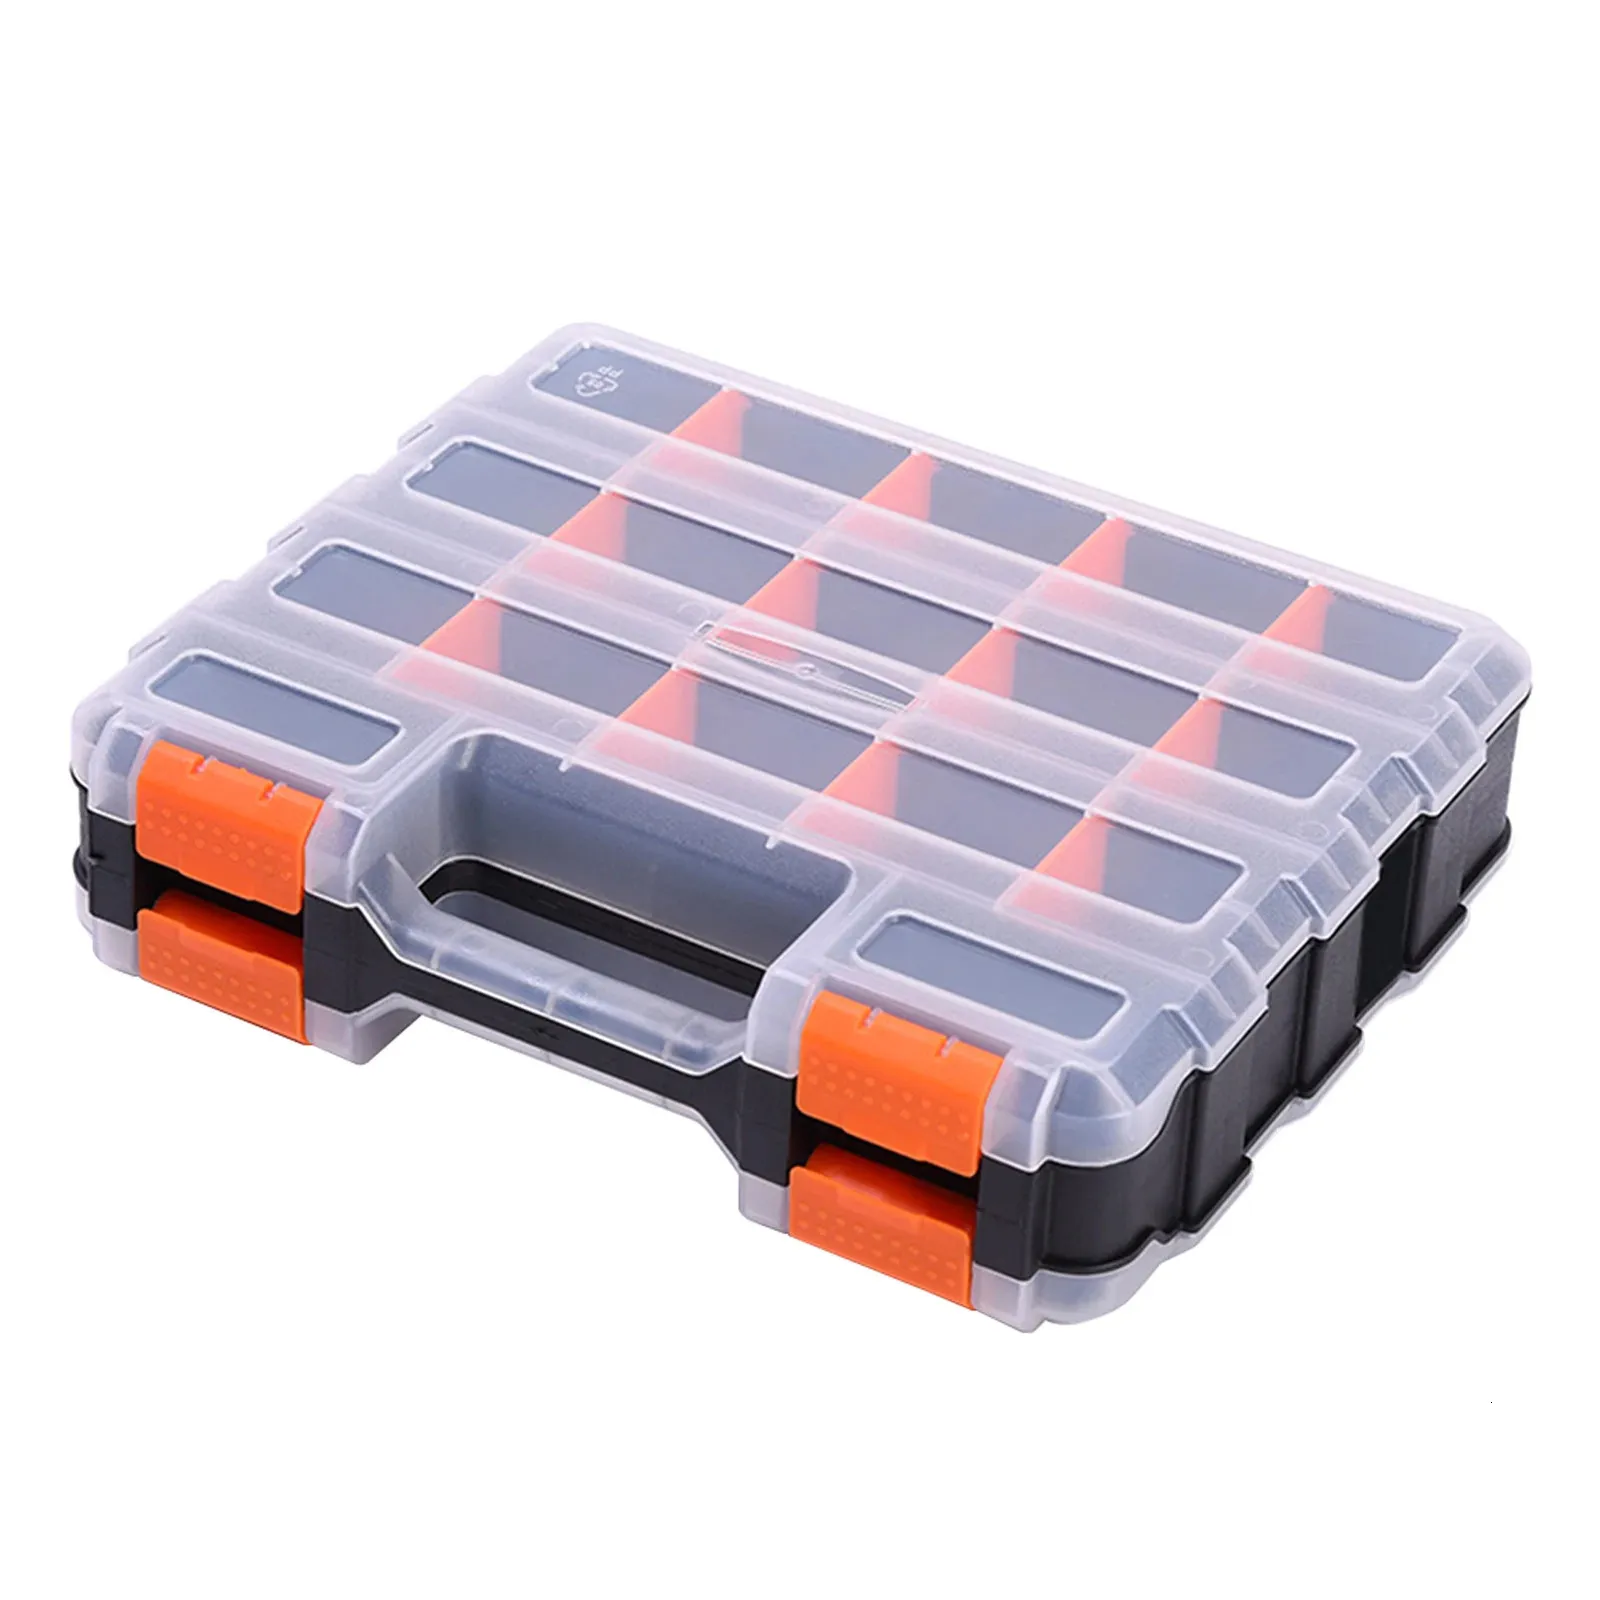 Tool Box Plastic Double Sided Nuts Portable Hardware Storage Case For Screws Durable Nails Removable Dividers Bolts Tool Box Organizer 231213